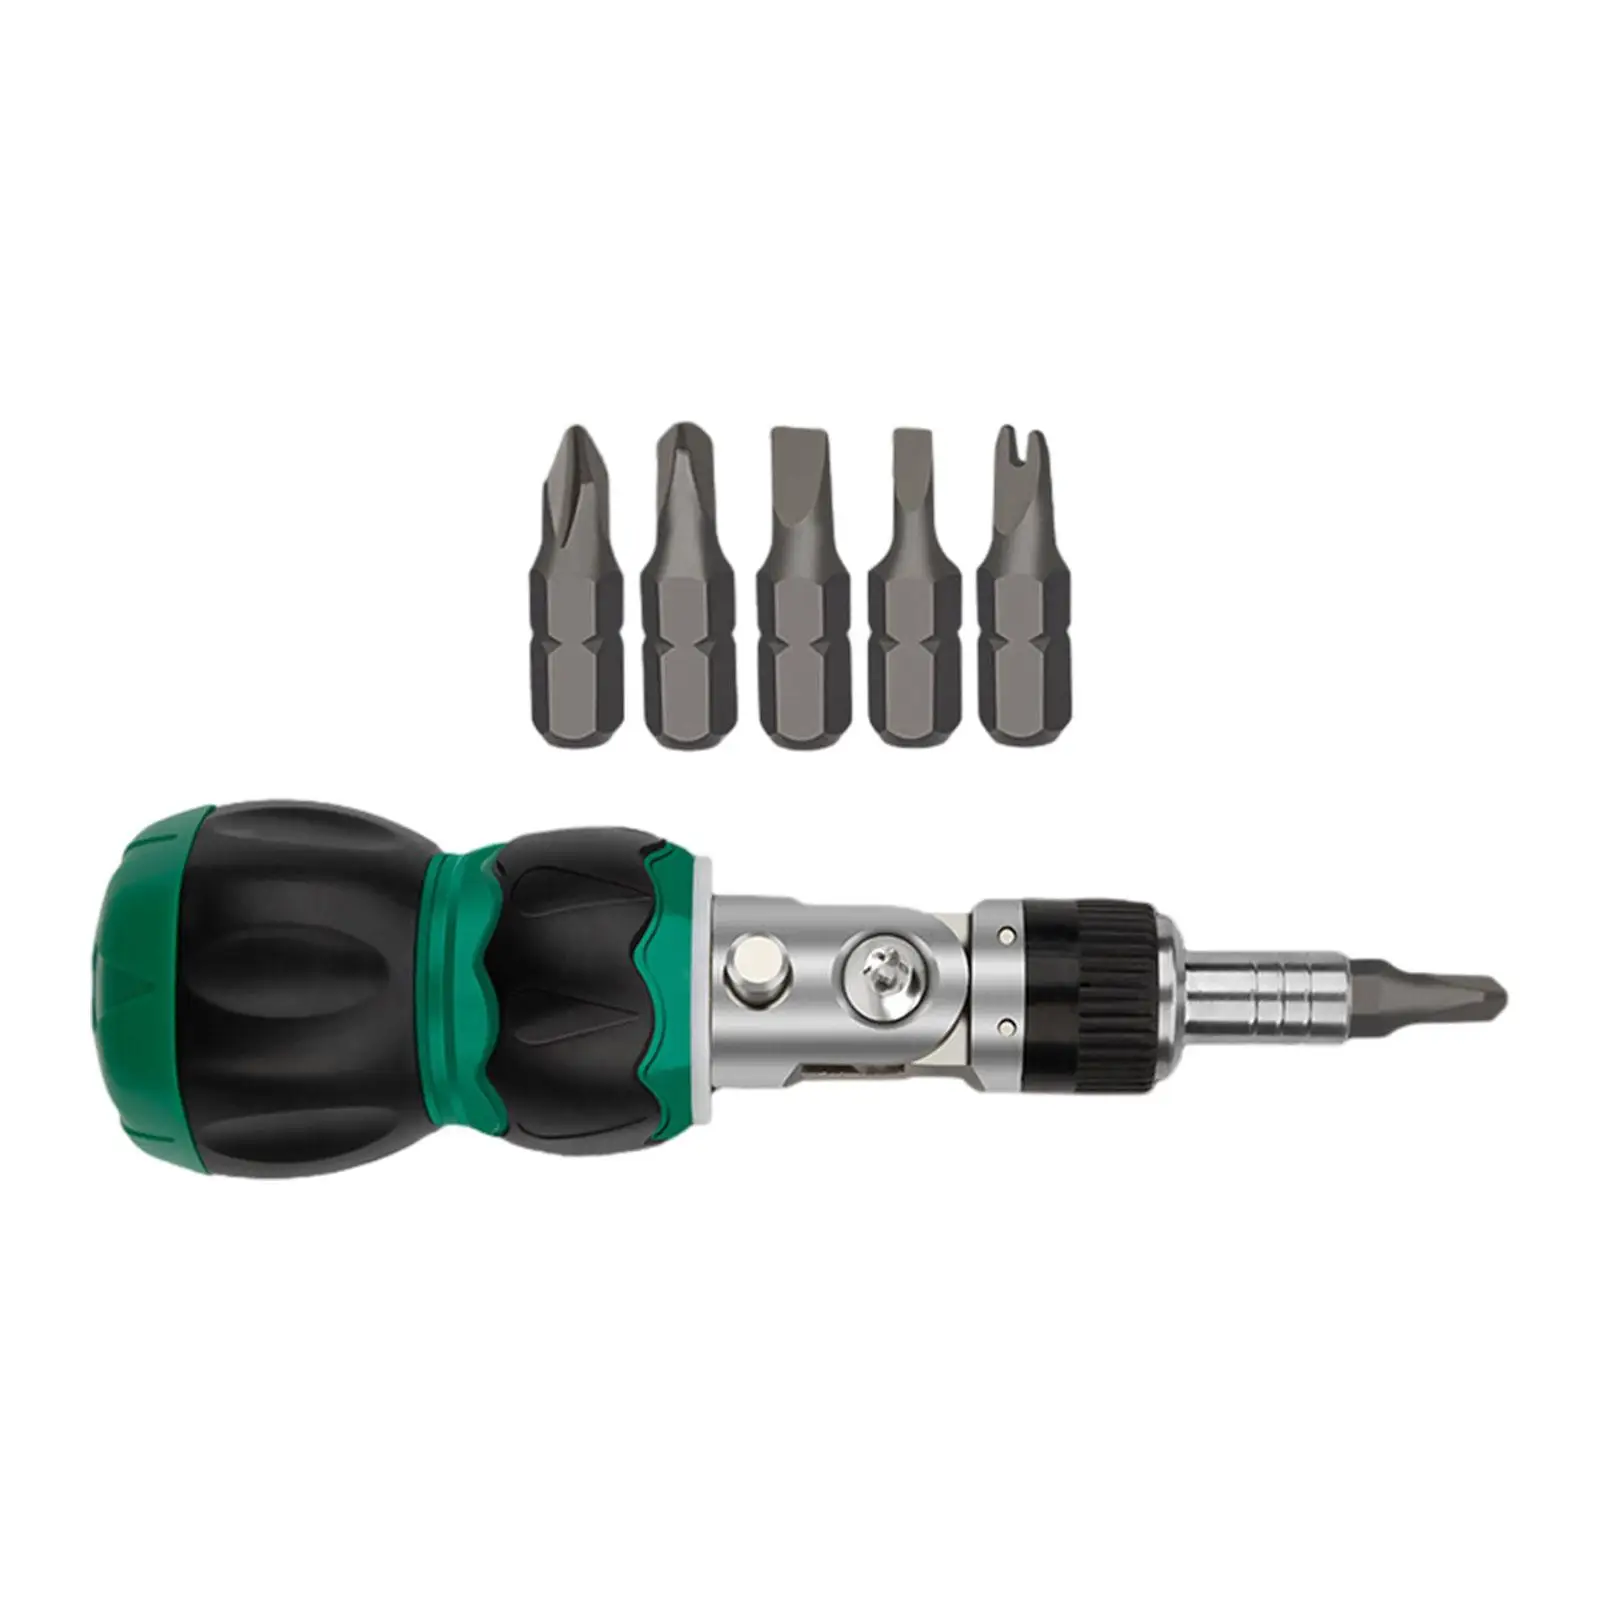 Ratcheting Screwdriver Set Three Directions Multipurpose Ratchet Telescopic Screwdriver for Electrician Maintenance Home Toolbox